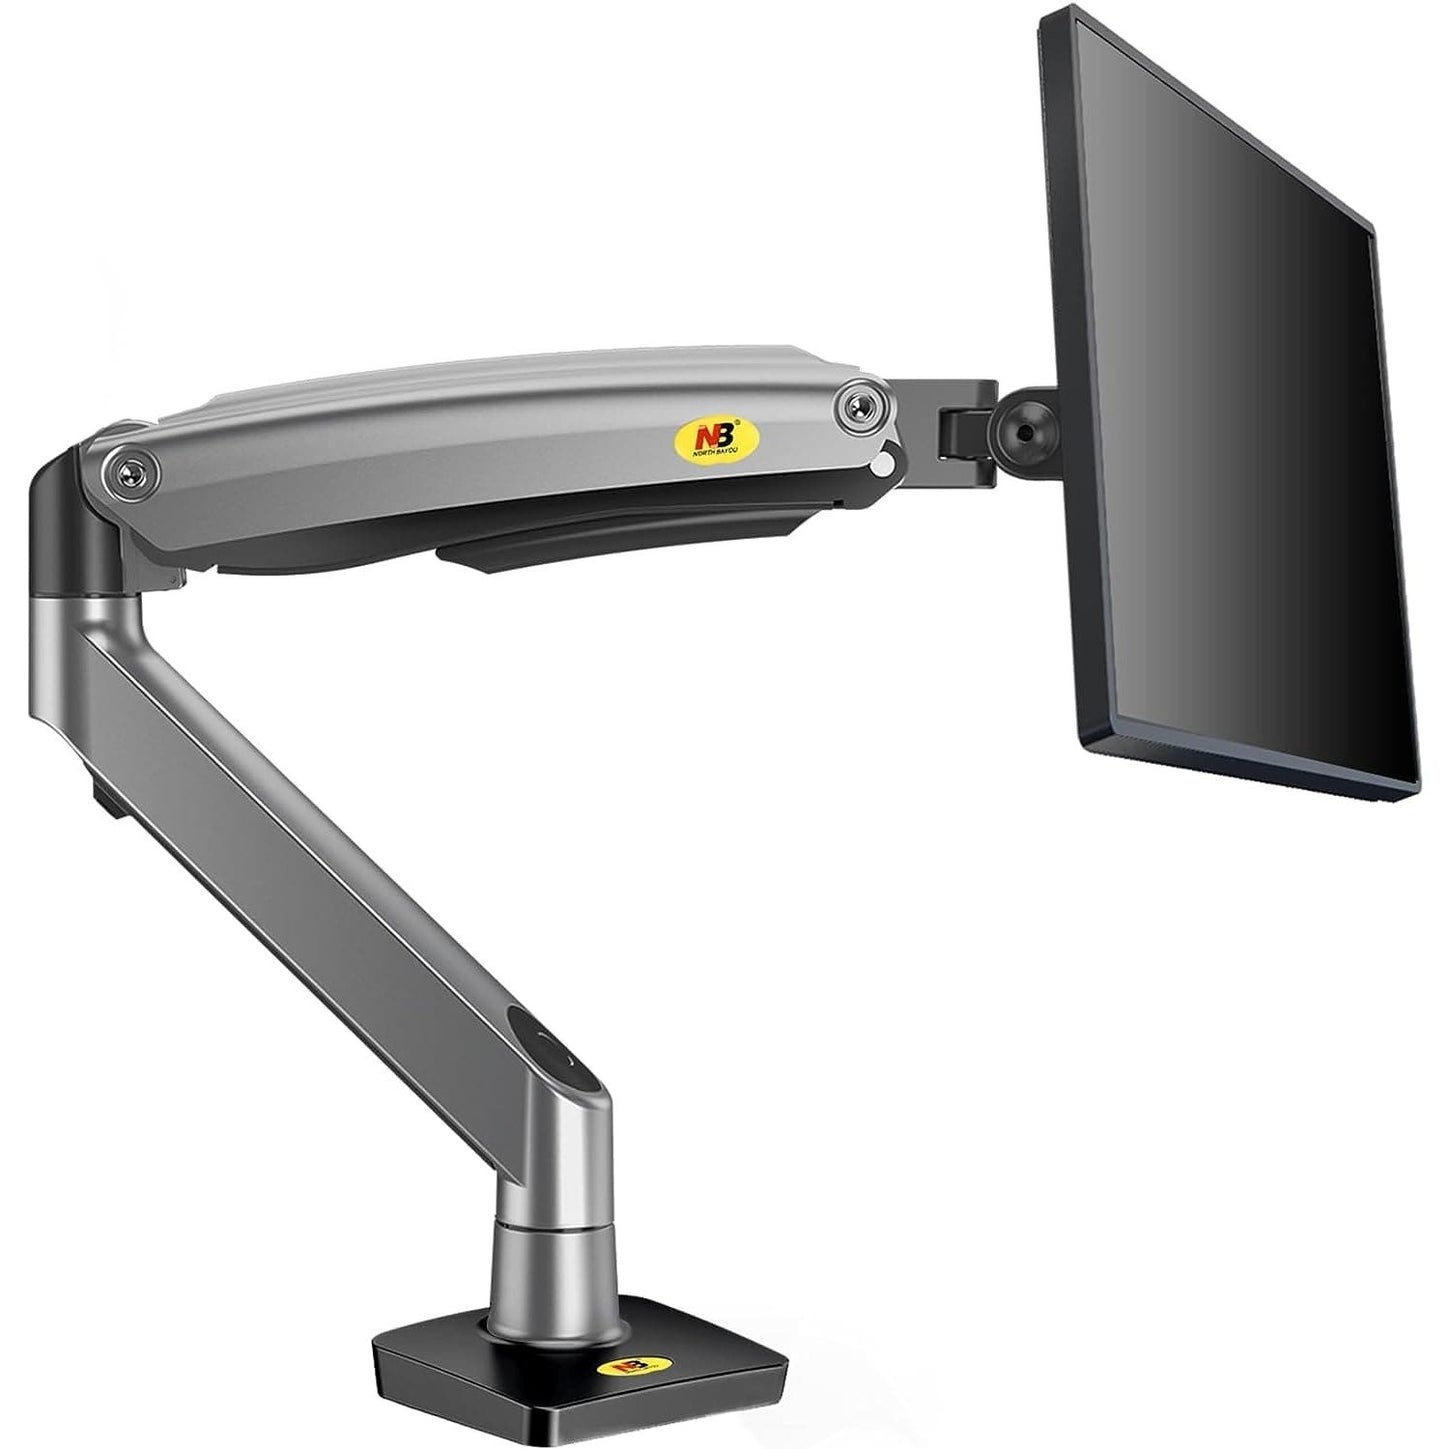 NB North Bayou Single Monitor Desk & Wall Mount Stand - F100A-B | Supply Master Accra, Ghana Home Accessories Buy Tools hardware Building materials